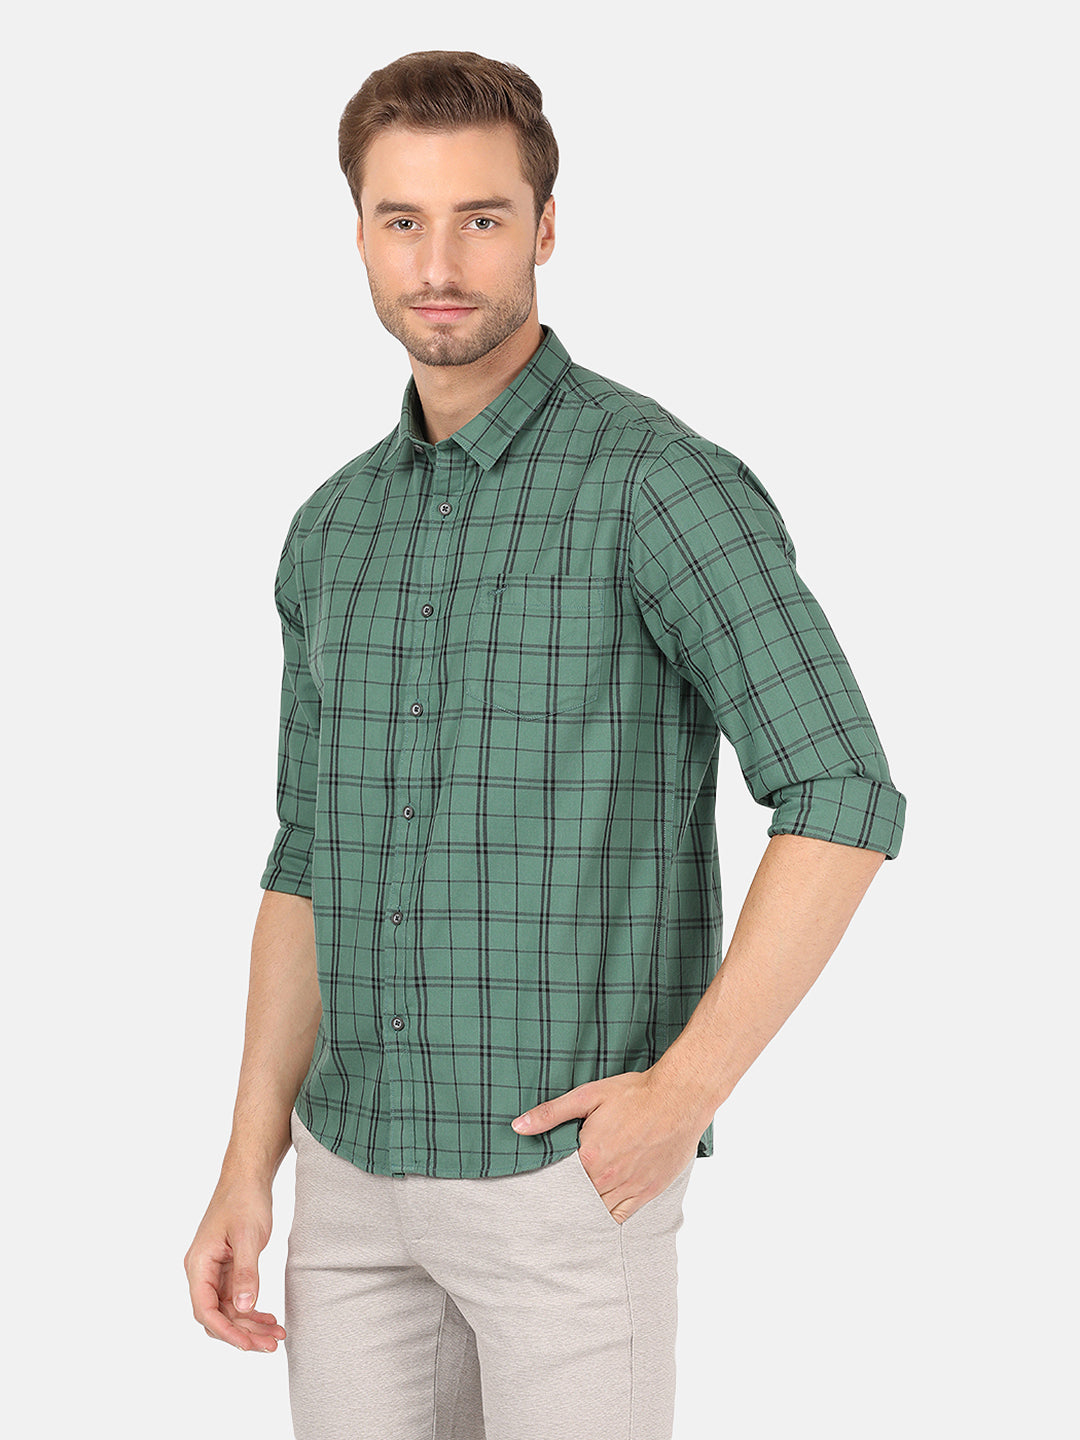 Crocodile Men's Casual Full Sleeve Comfort Fit Checks Green With Collar Shirt Online